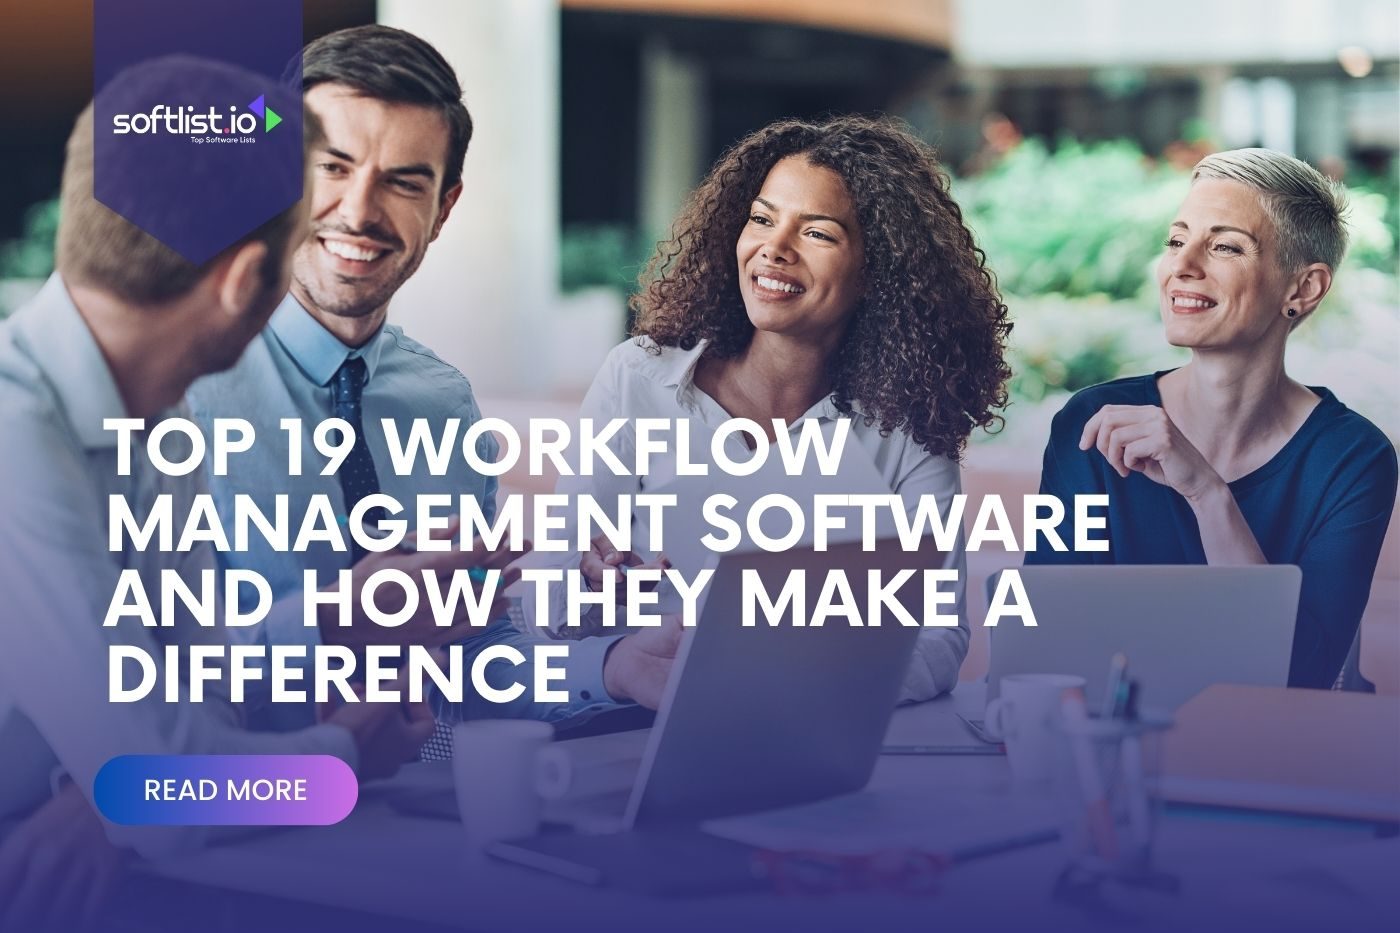 Top 19 Workflow Management Software and How They Make a Difference